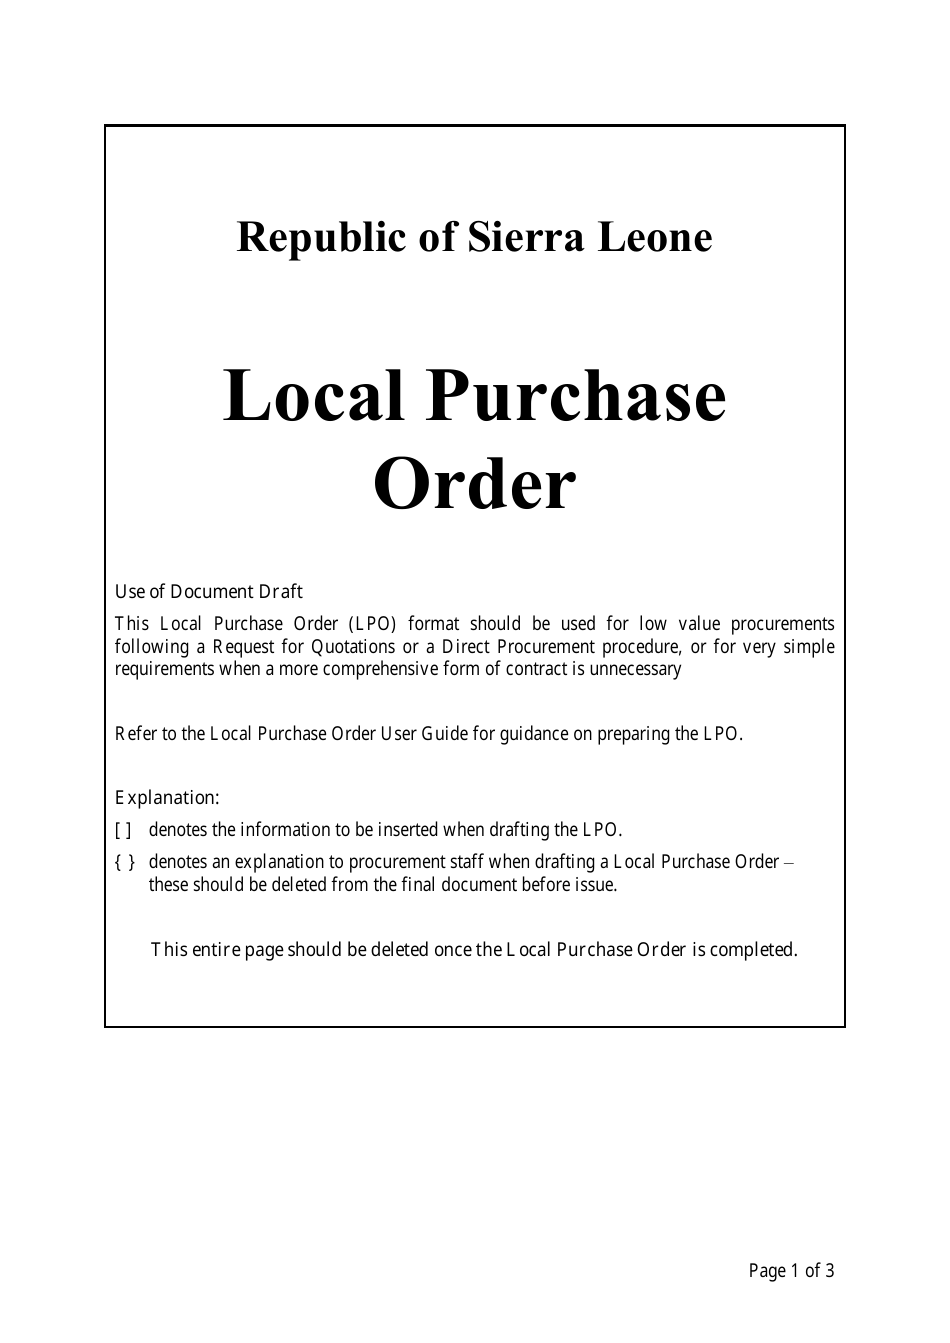 Local Purchase Order Form - Sierra Leone, Page 1